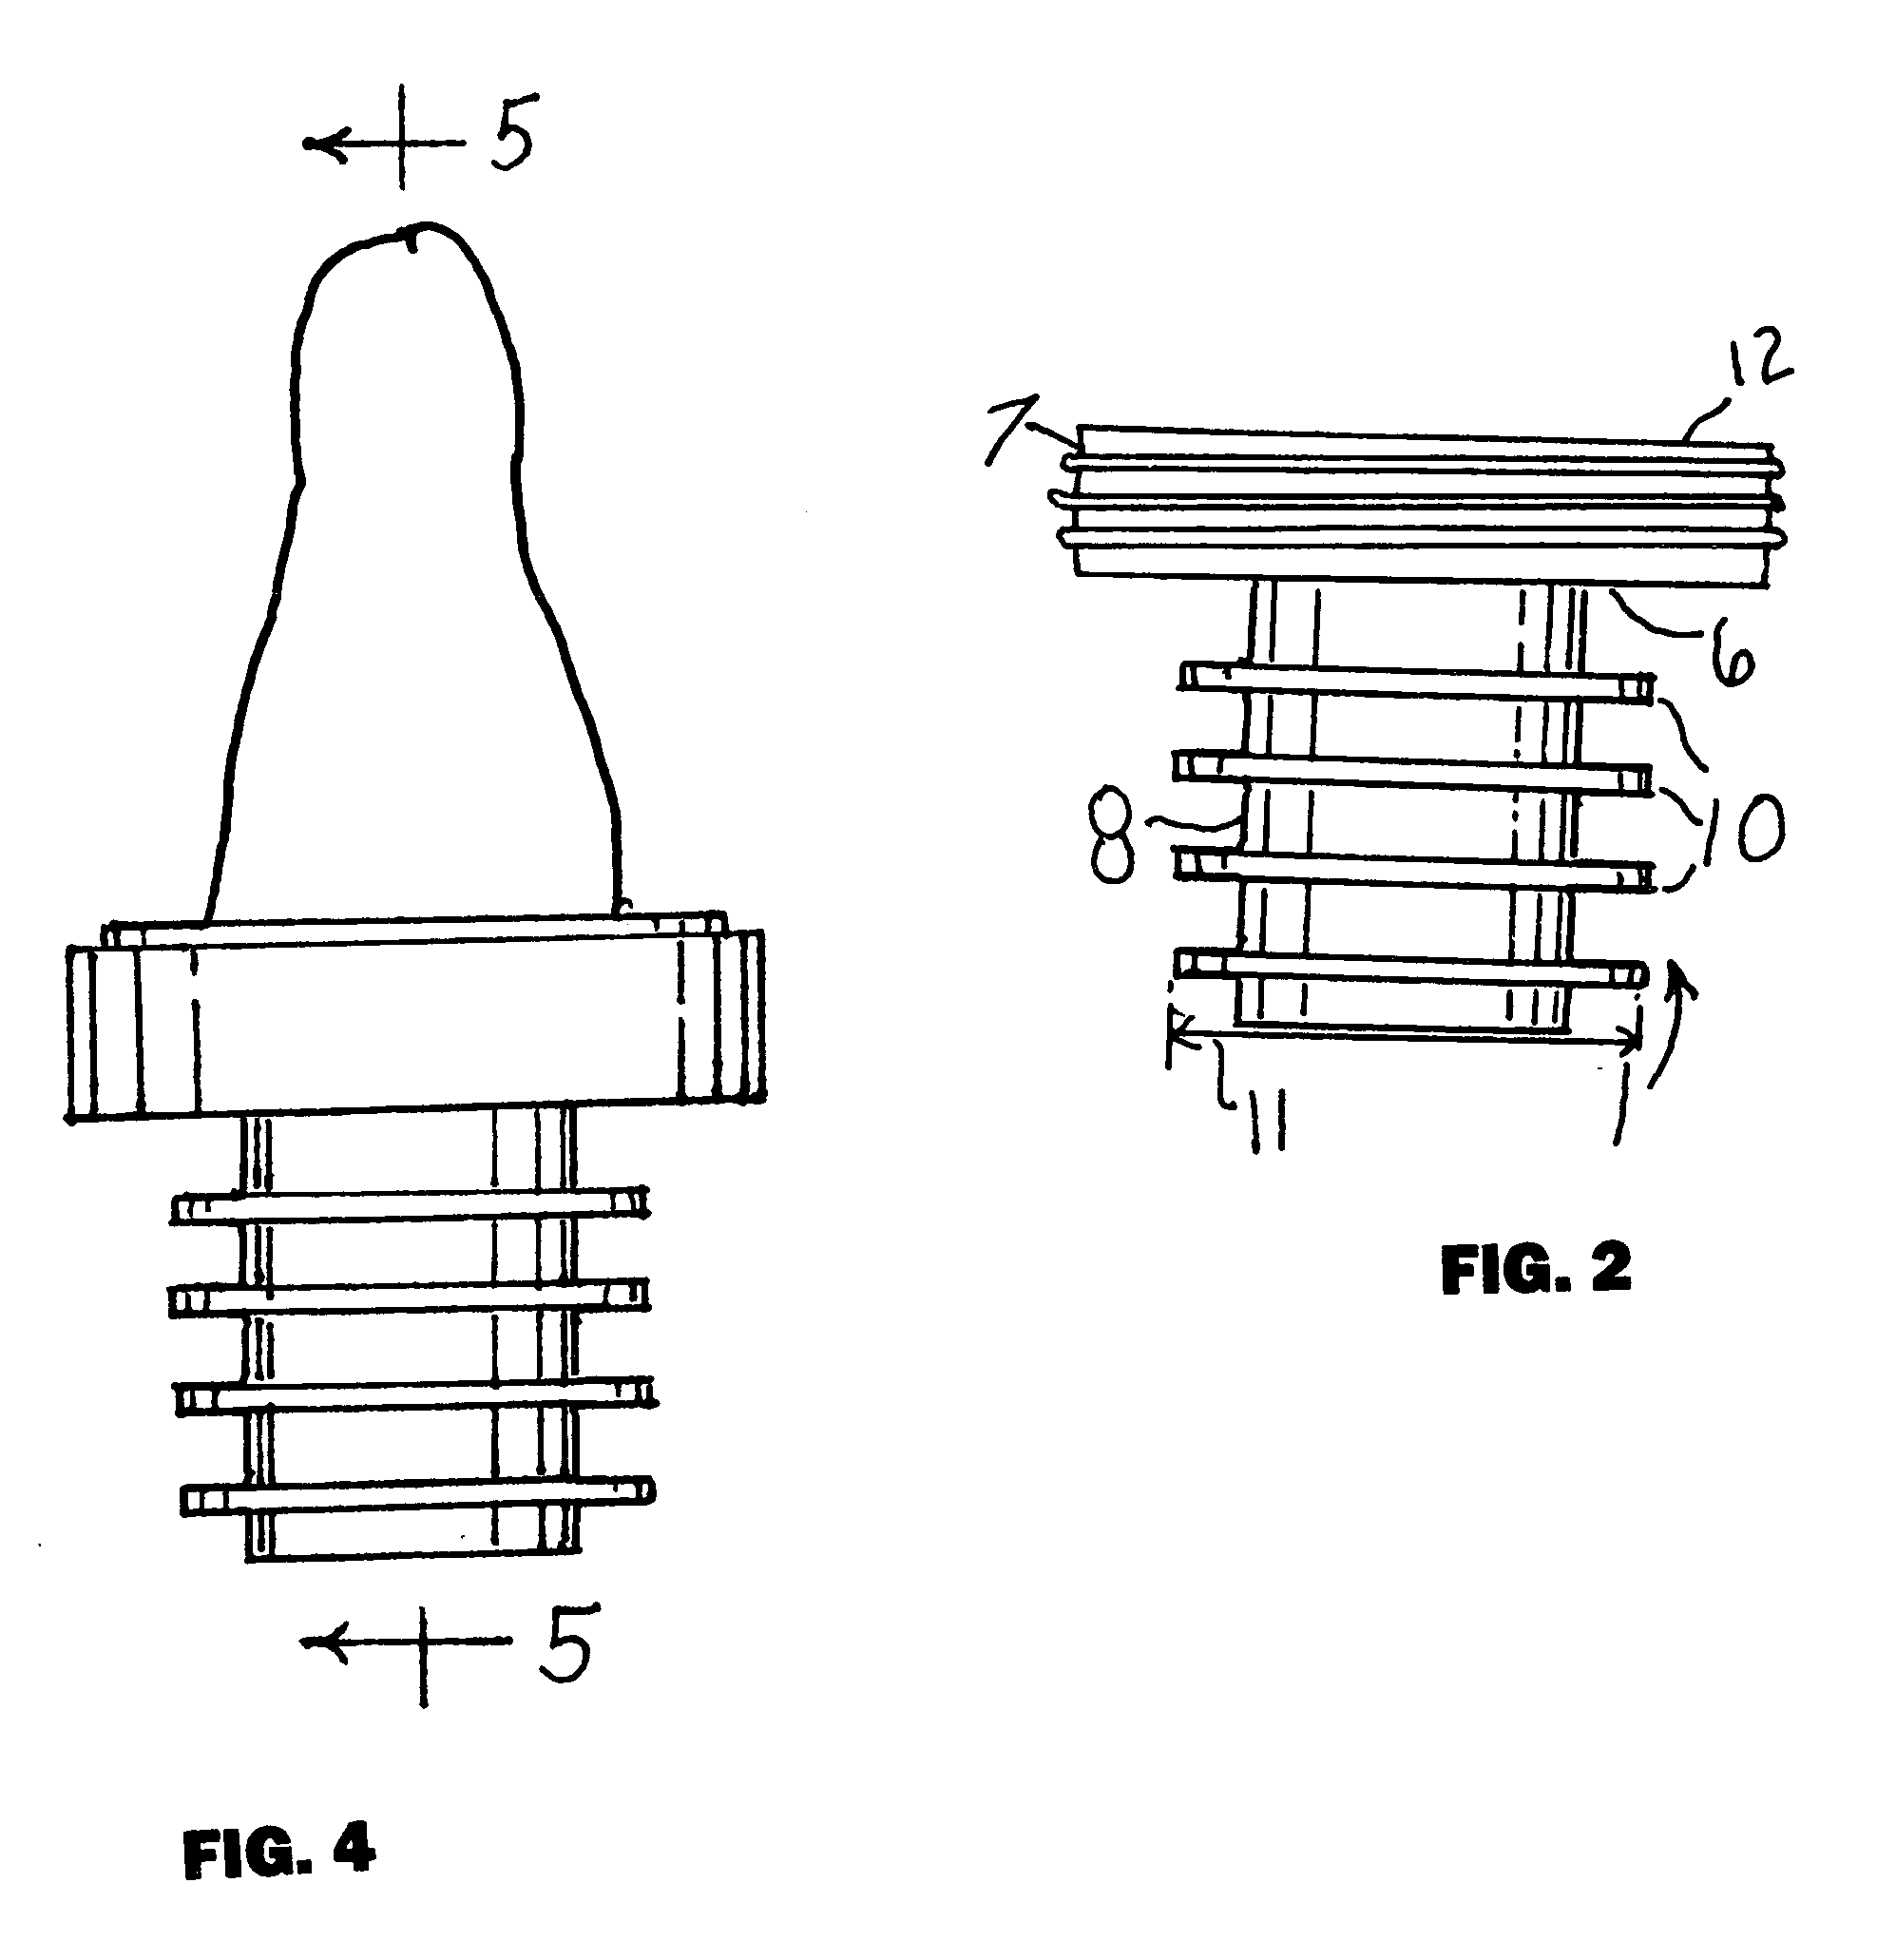 Beverage bottle nipple and adapter